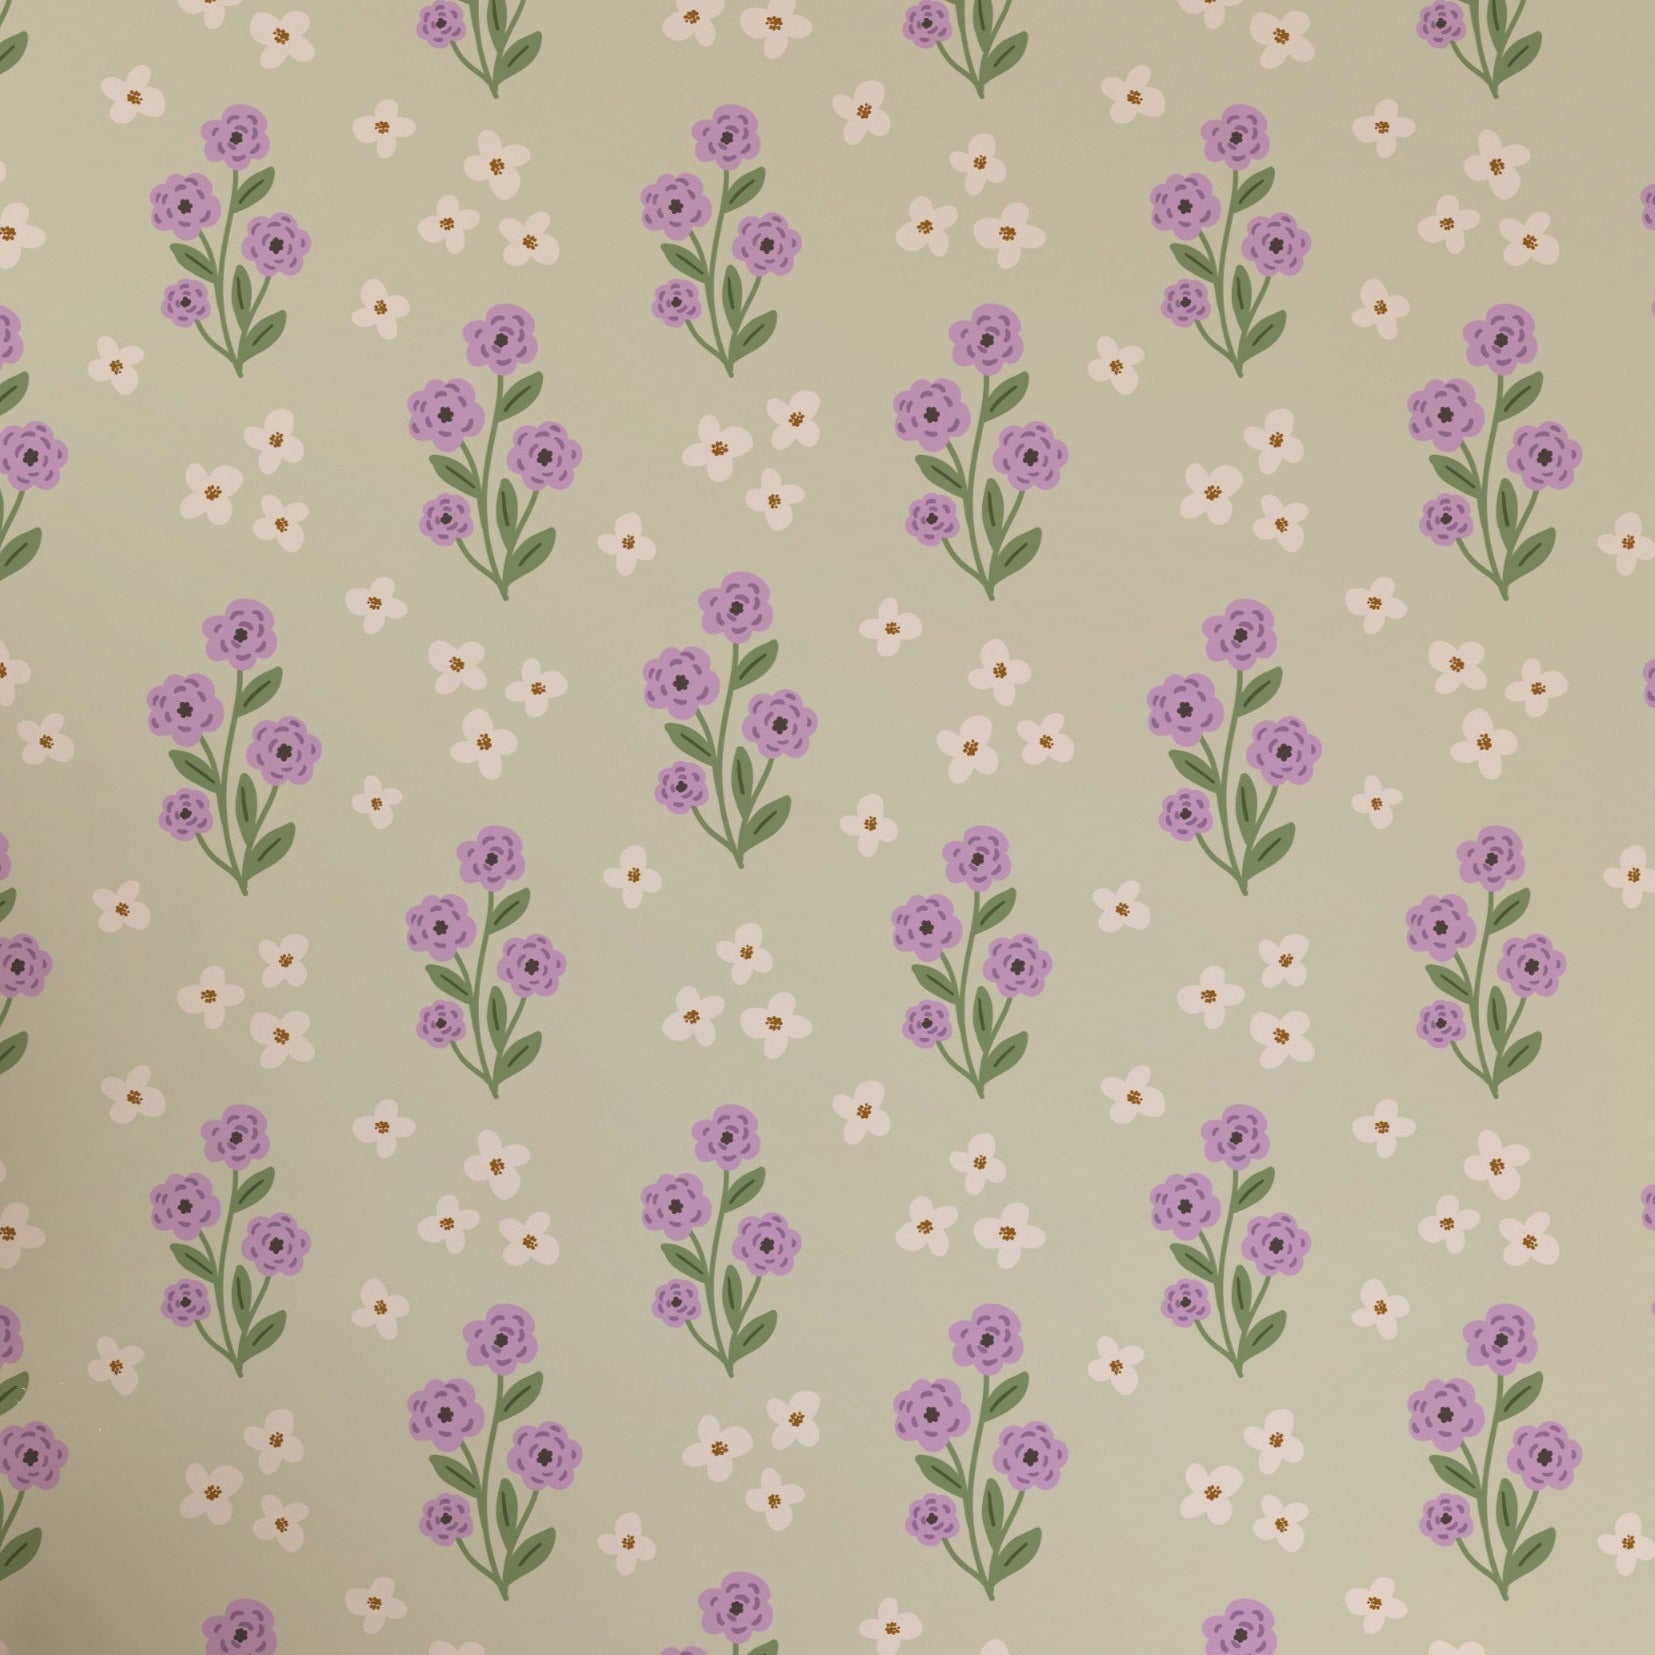 A delicate pattern of small, purple floral bouquets interspersed with tiny white flowers against a soothing green backdrop, the Peaceful Floral Bouquet Wallpaper adds a gentle, charming touch to any interior.